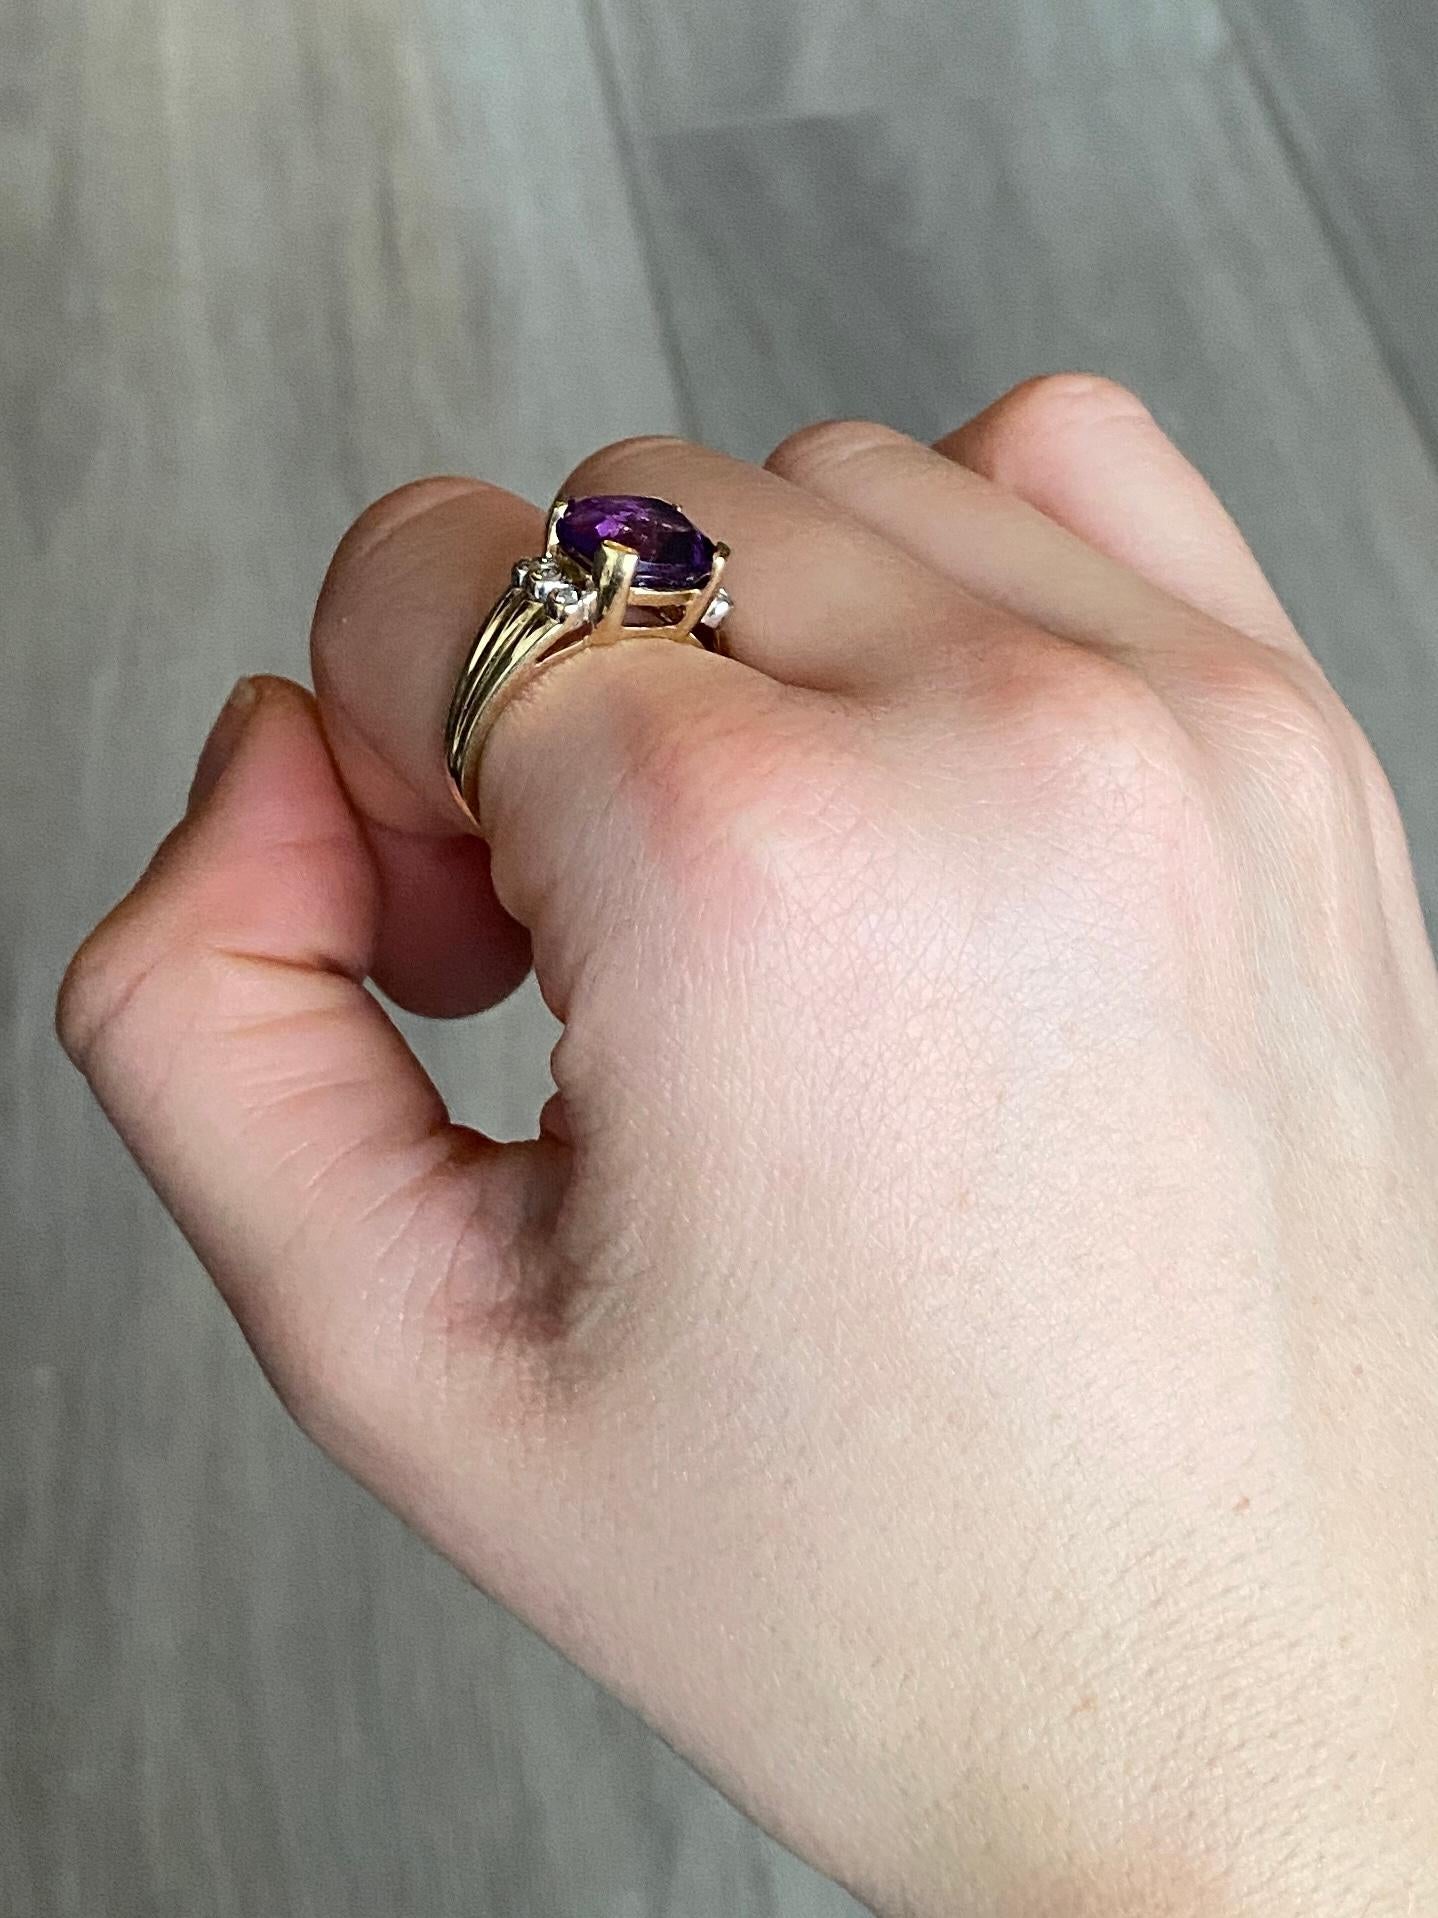 The amethyst stone in this ring is bright and a gorgeous colour. There are two trios of diamonds that sit either side of the central stone. Diamond total 20pts. Modelled in 9carat gold. Amethyst dimensions 10x10mm.

Ring Size: N or 6 3/4 
Height Off